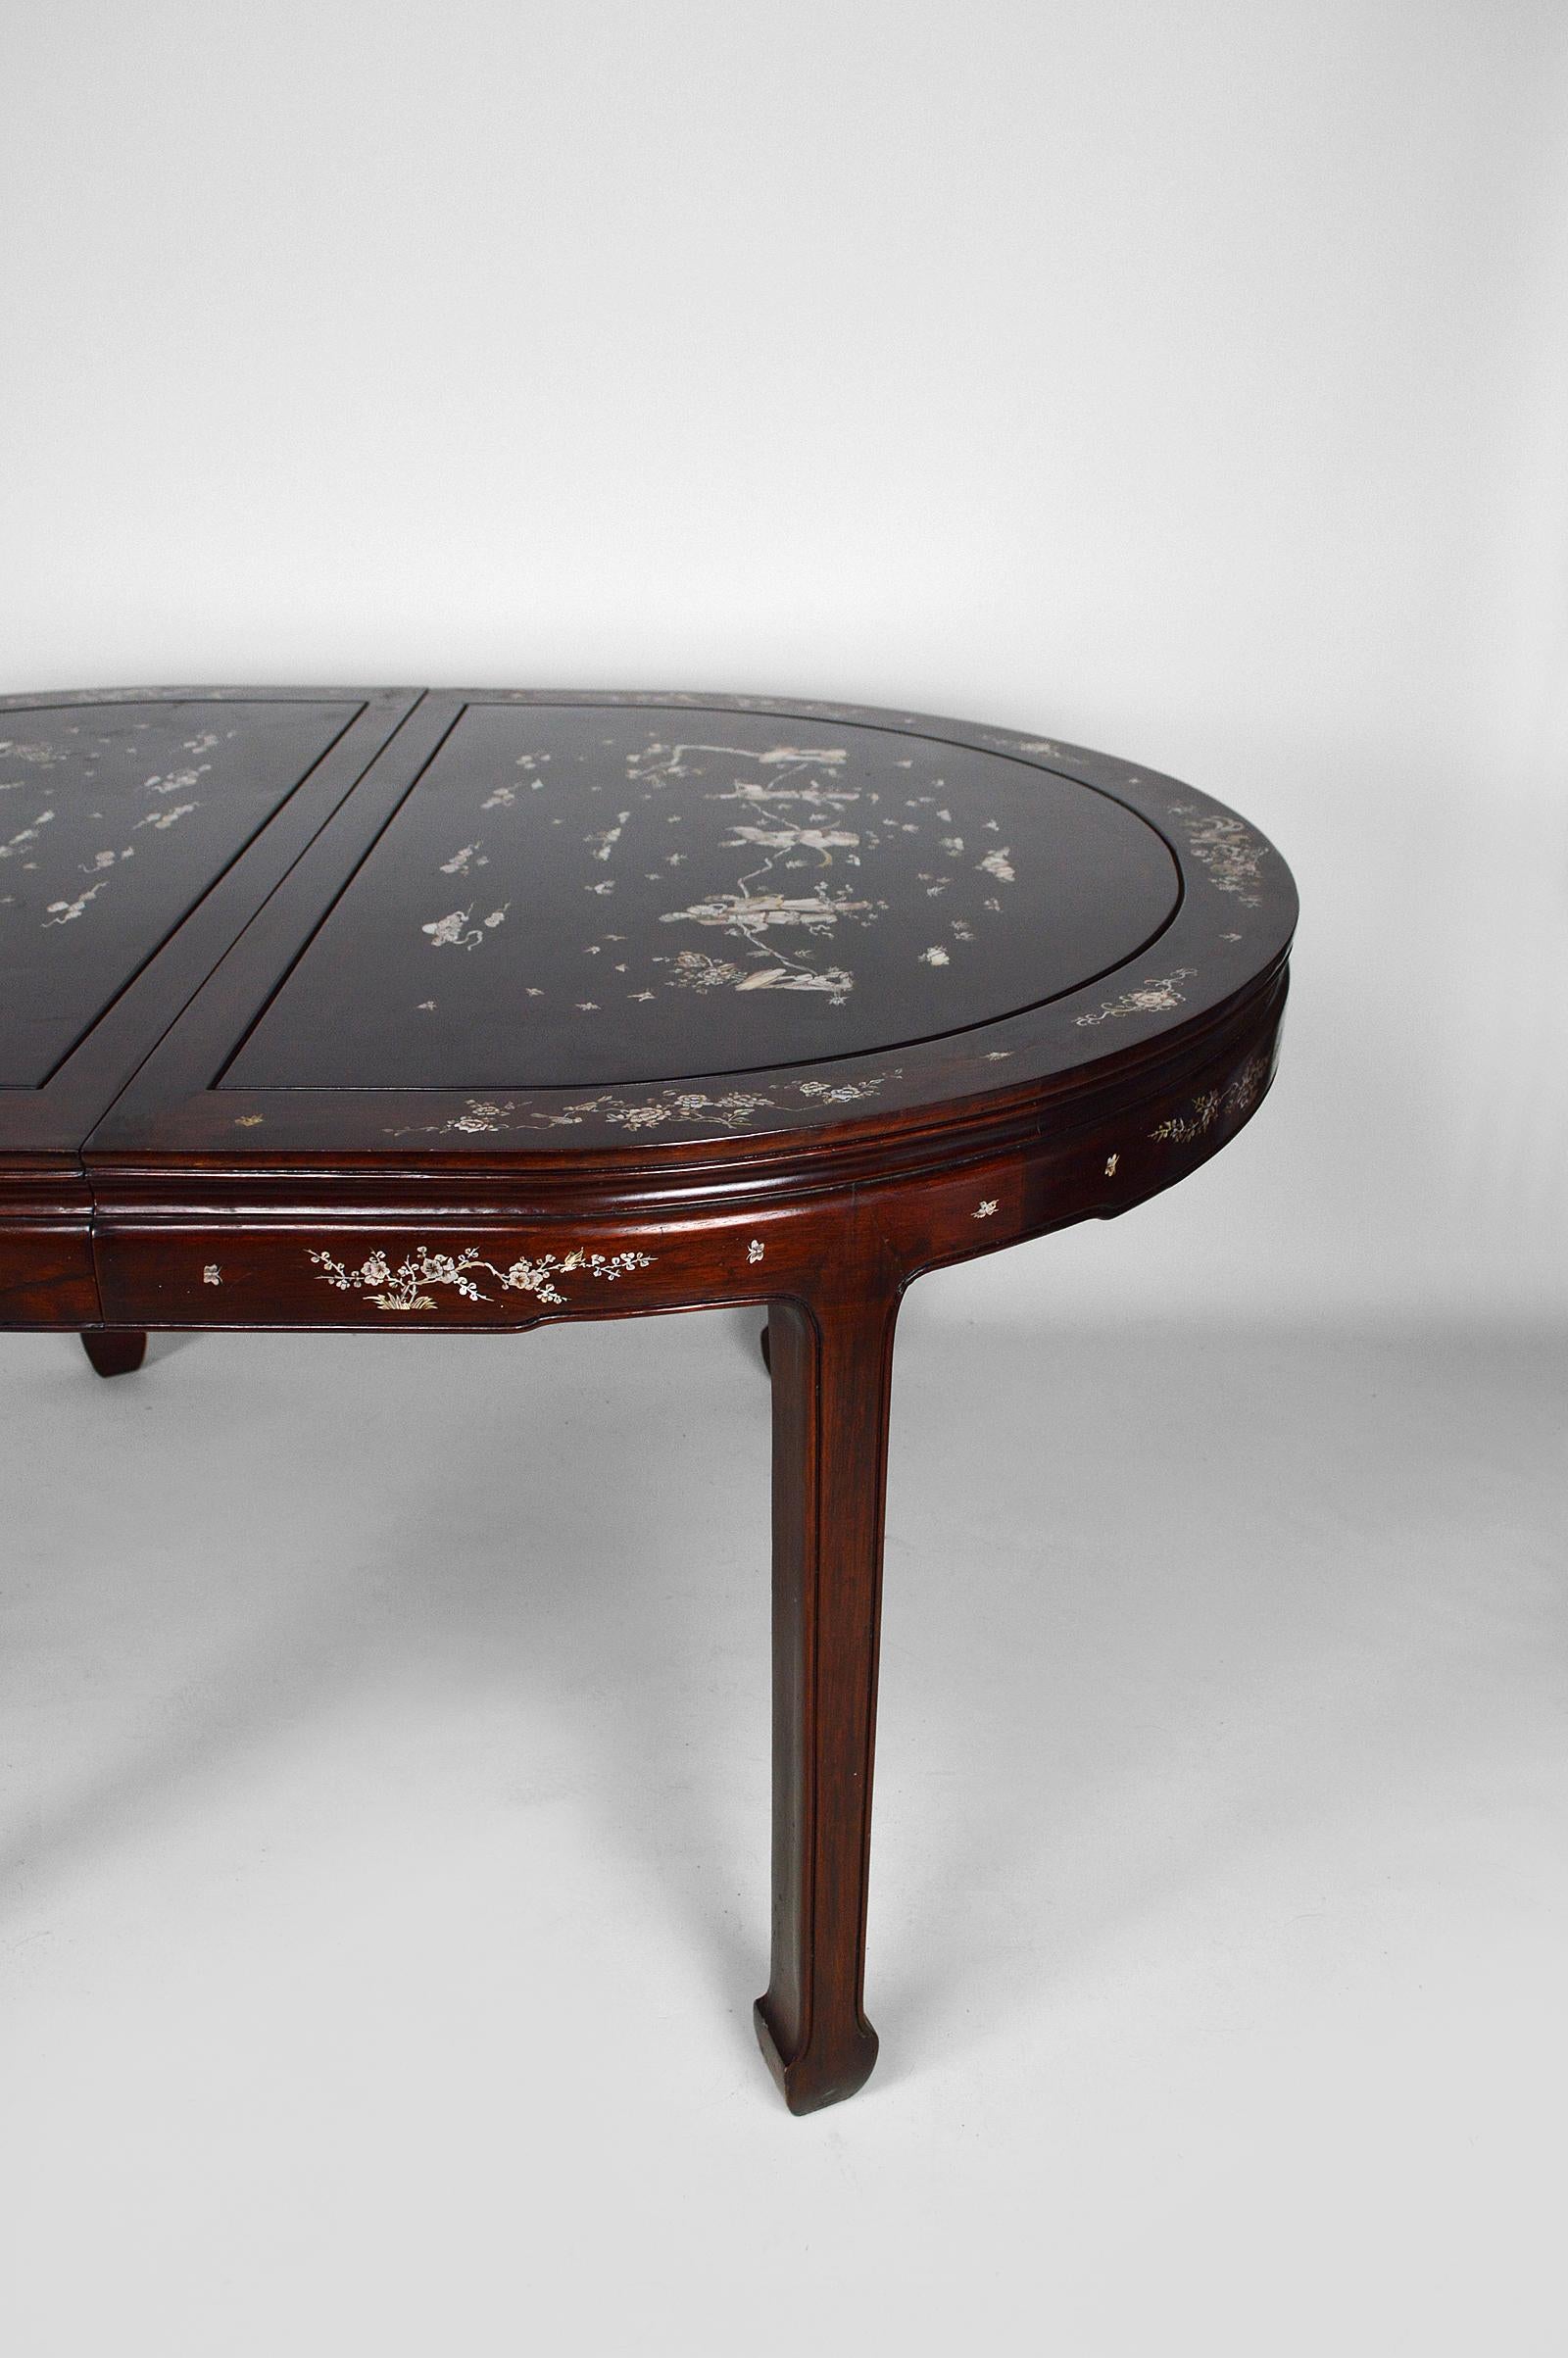 Asian Inlaid Wooden Dining Table with Extensions, Mid-20th Century 5